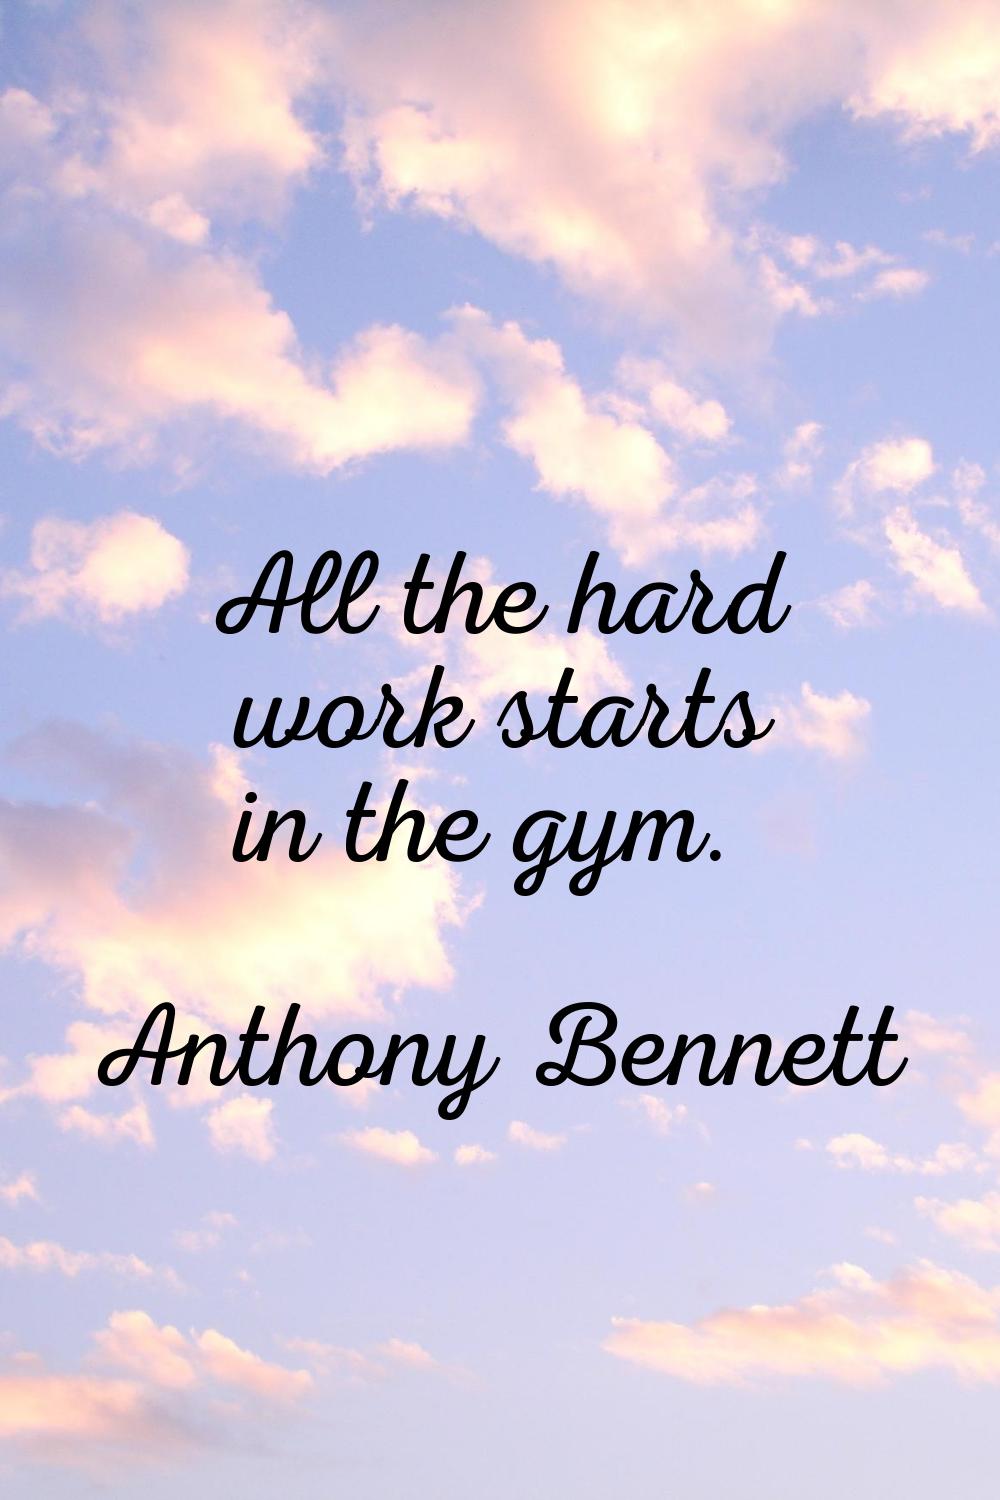 All the hard work starts in the gym.